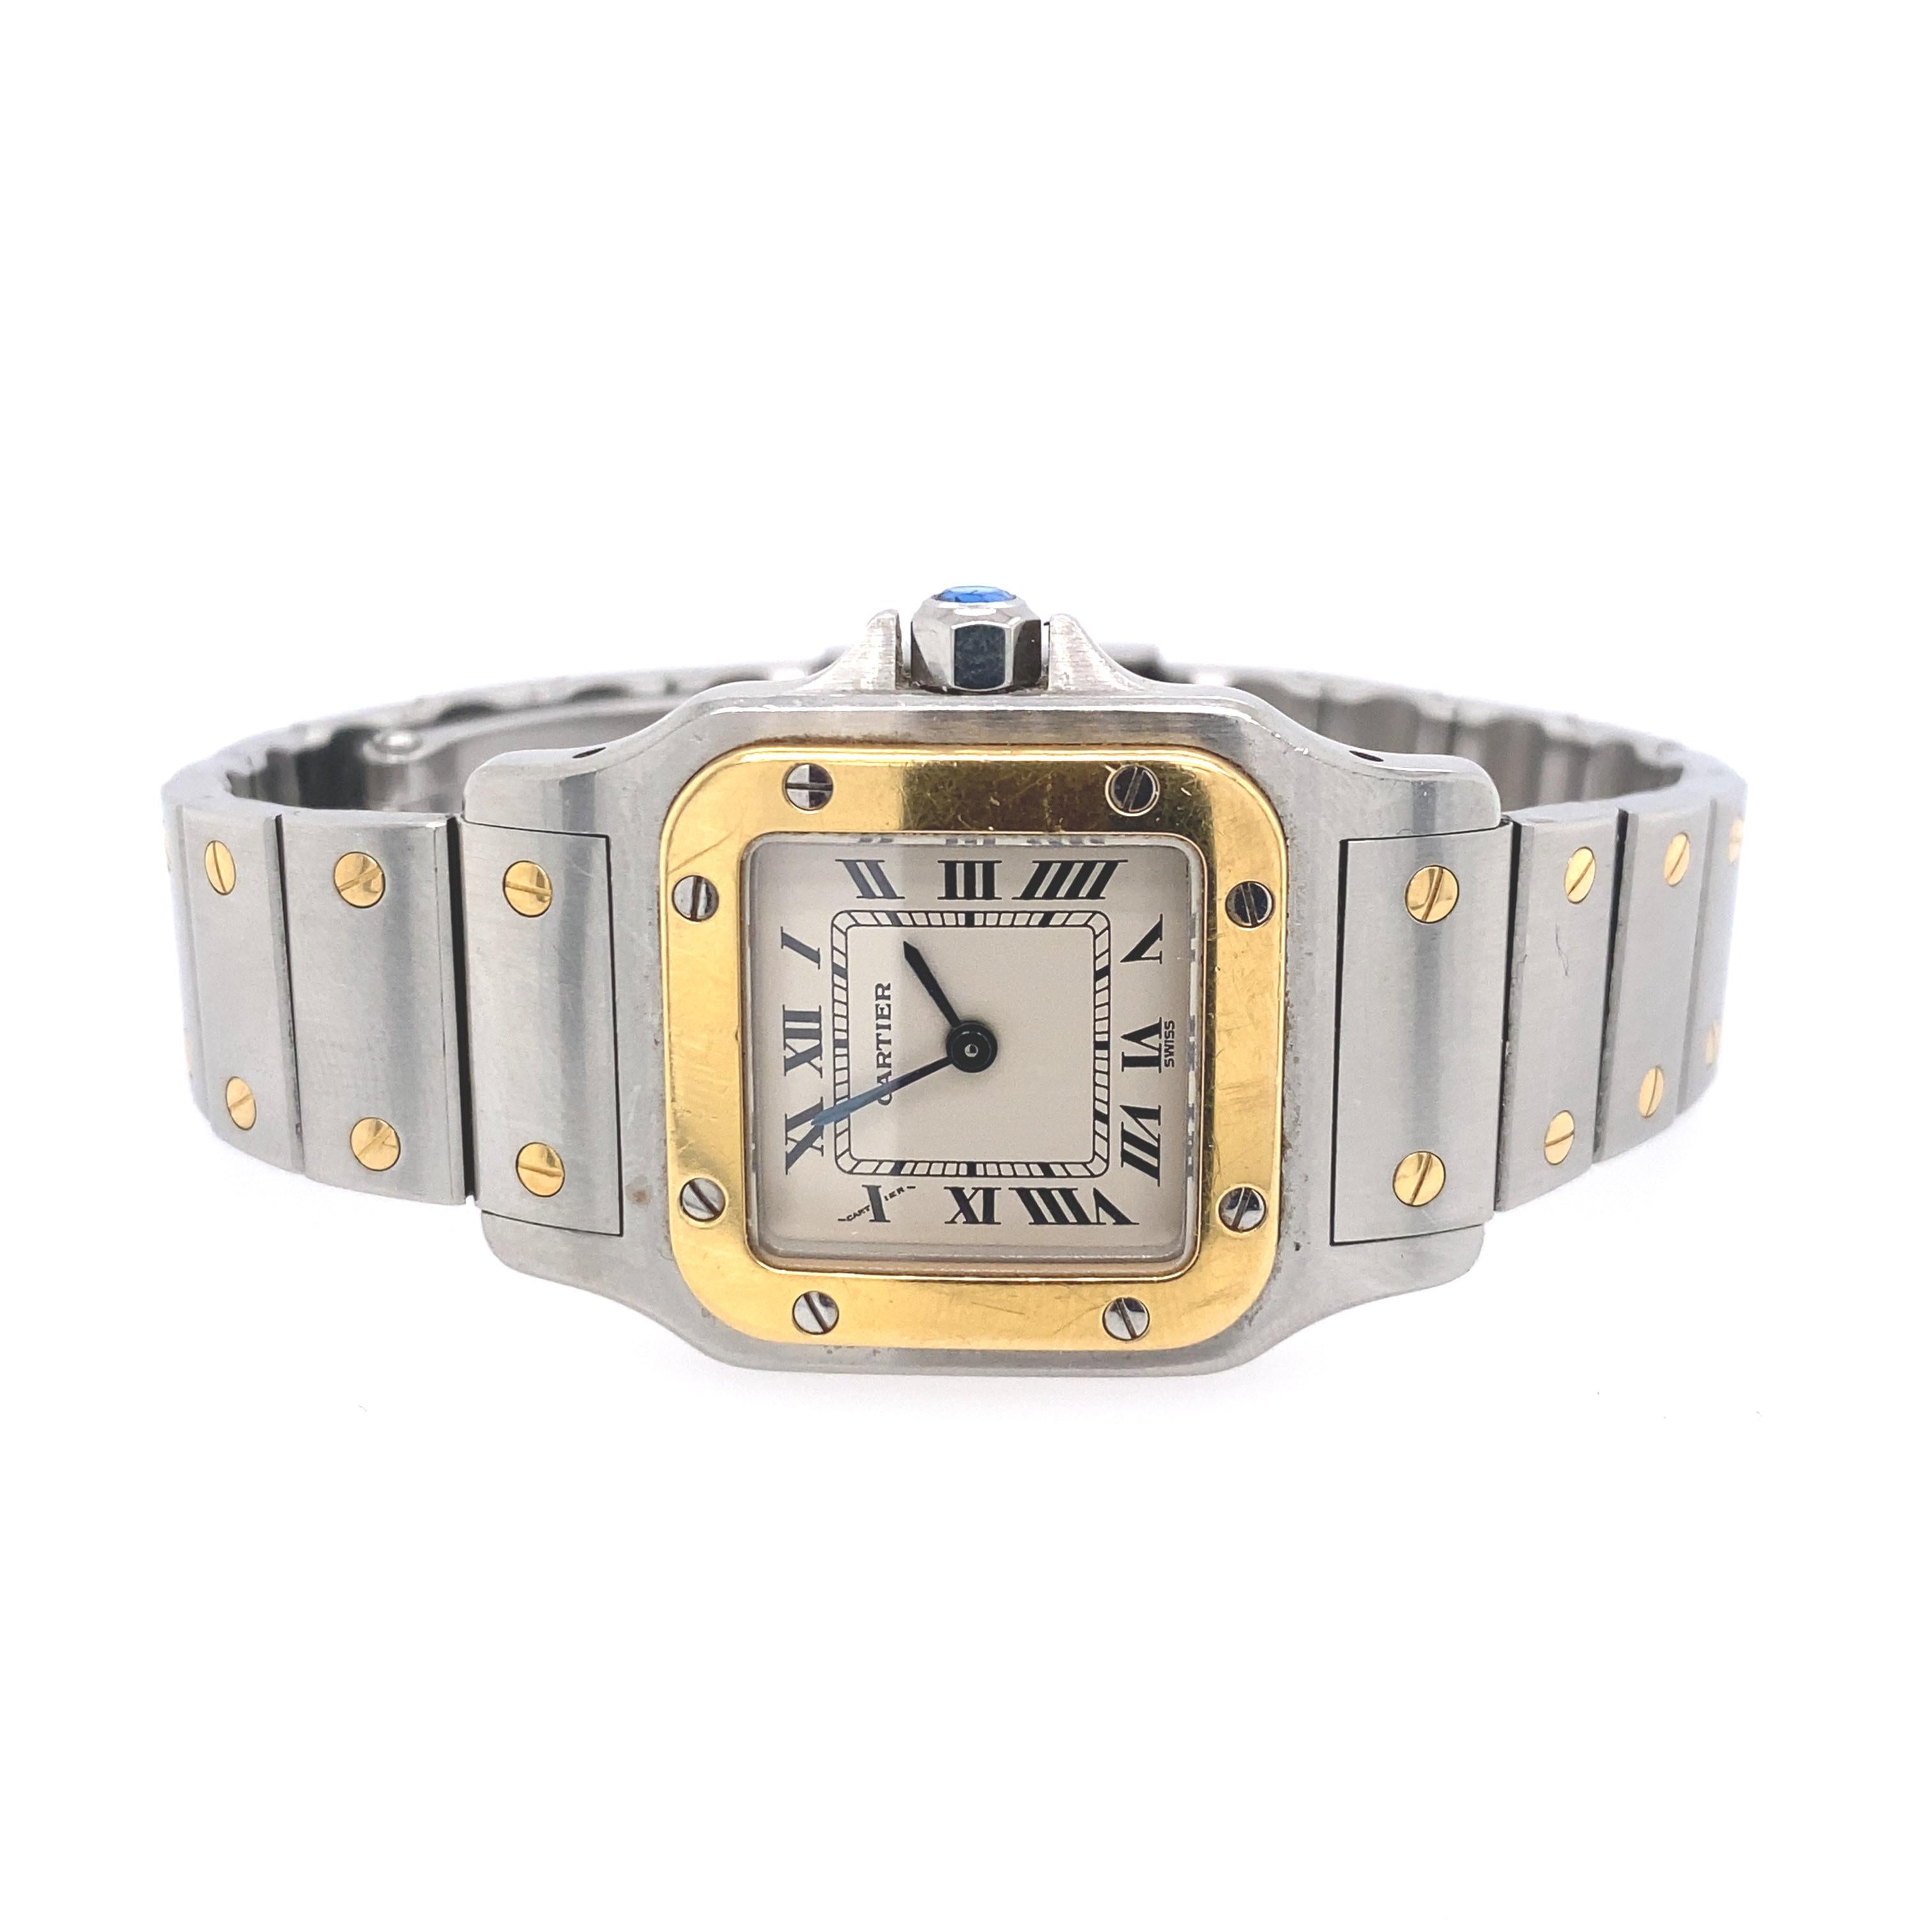 Cartier Stainless Steel and Gold 'Santos' Wristwatch
18 kt., quartz, square off-white dial, black Roman numerals, blued steel hands, cushion-shaped screw-down gold bezel, round synthetic blue spinel crown, dia. ap. 23.5 mm., tapered bar link steel